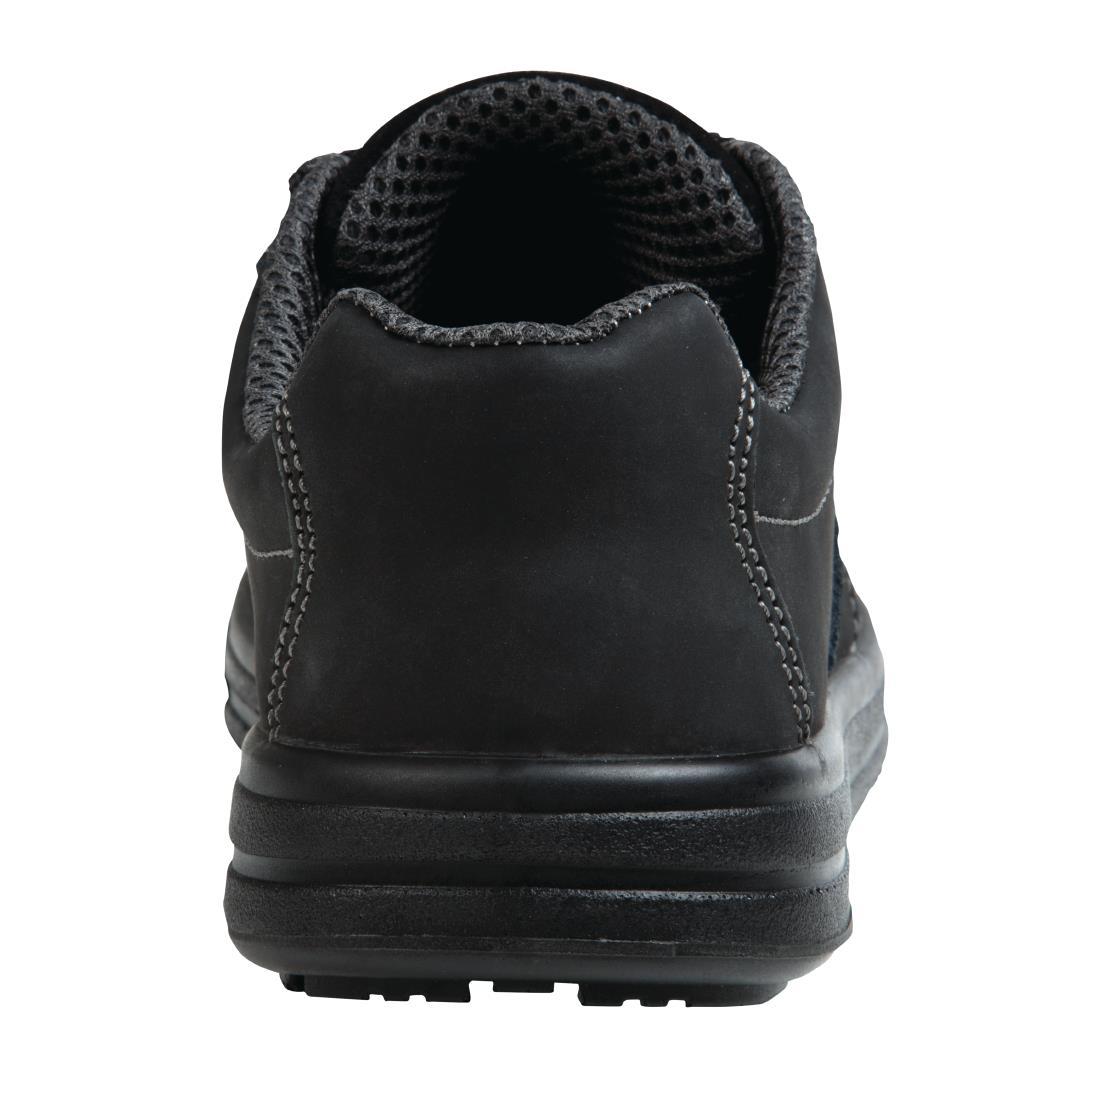 Slipbuster Safety Trainers Black 39 - BB420-39  - 4